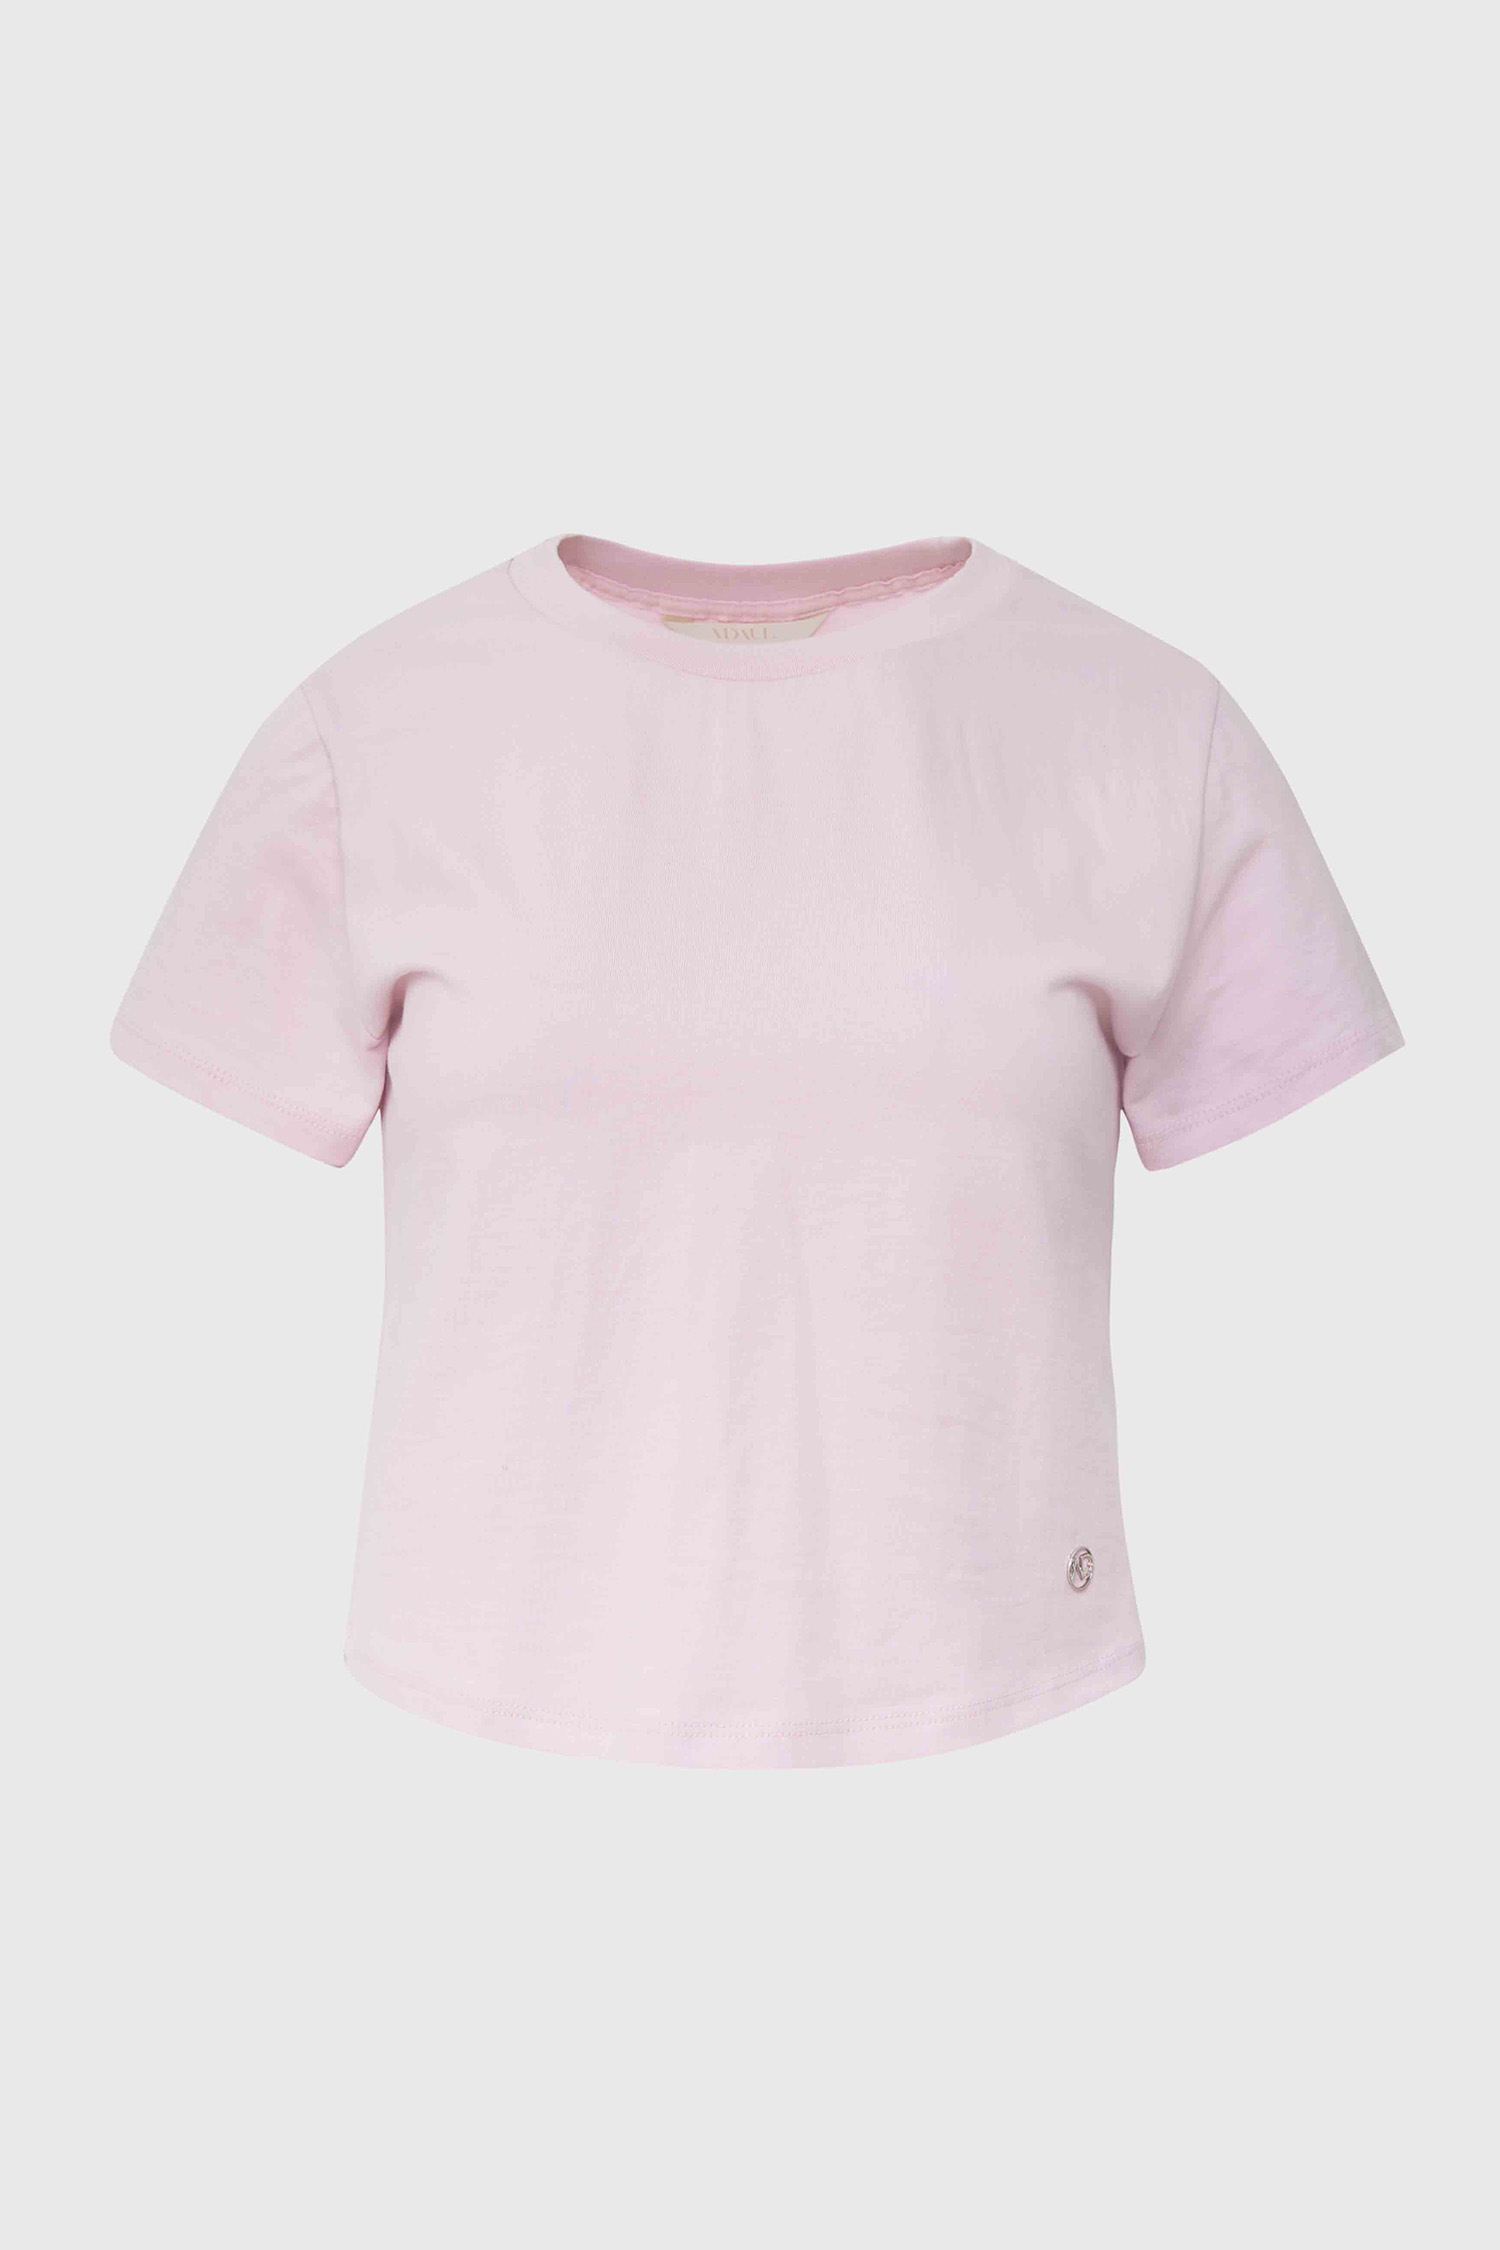 Basic AD silver point t shirt - pink